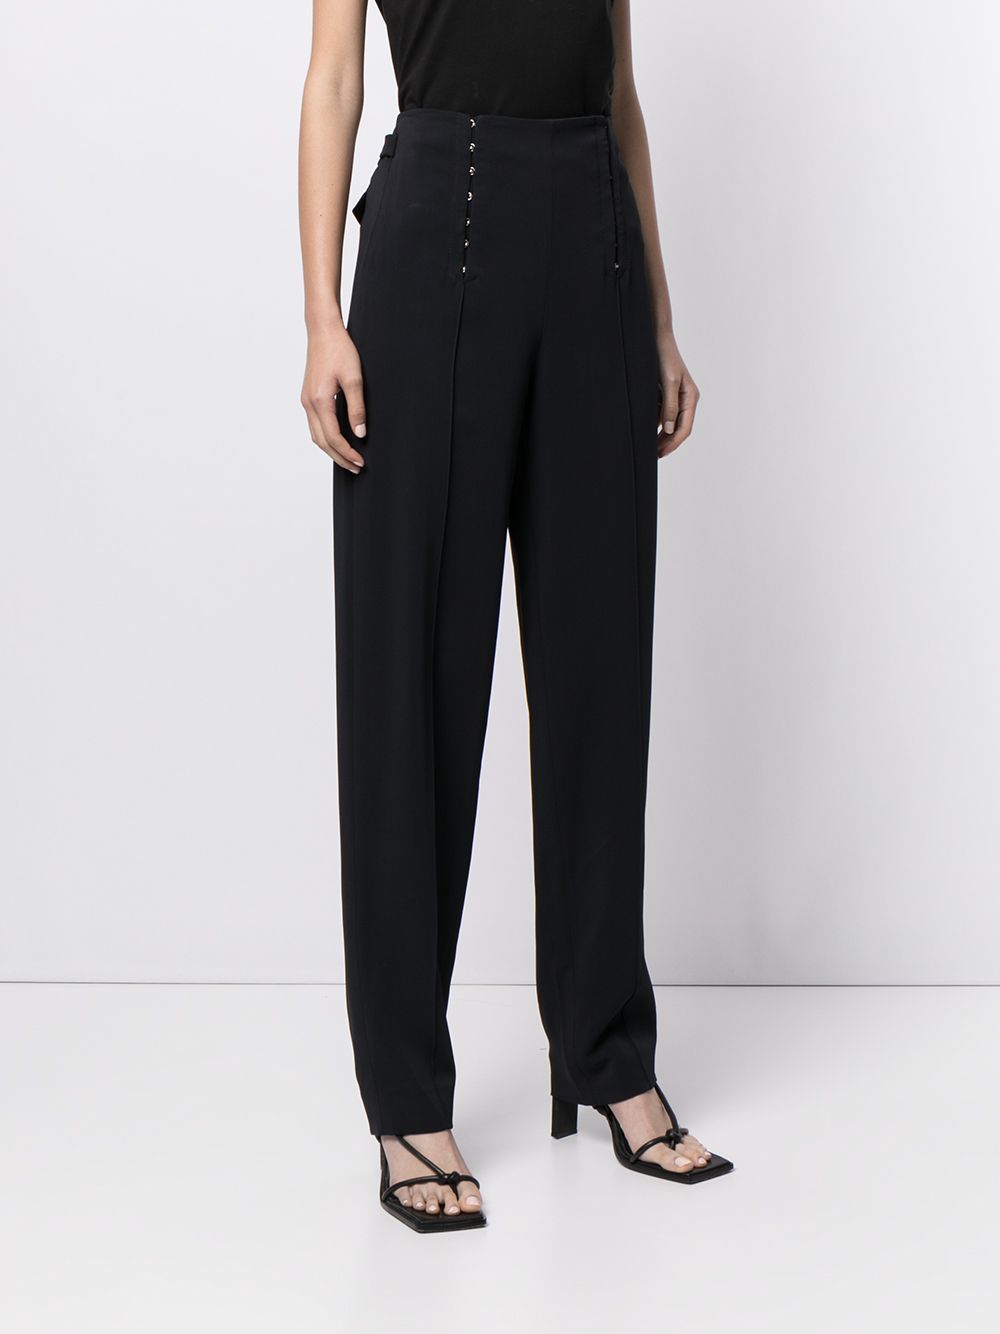 Dion Lee high-waisted Corset Trousers - Farfetch